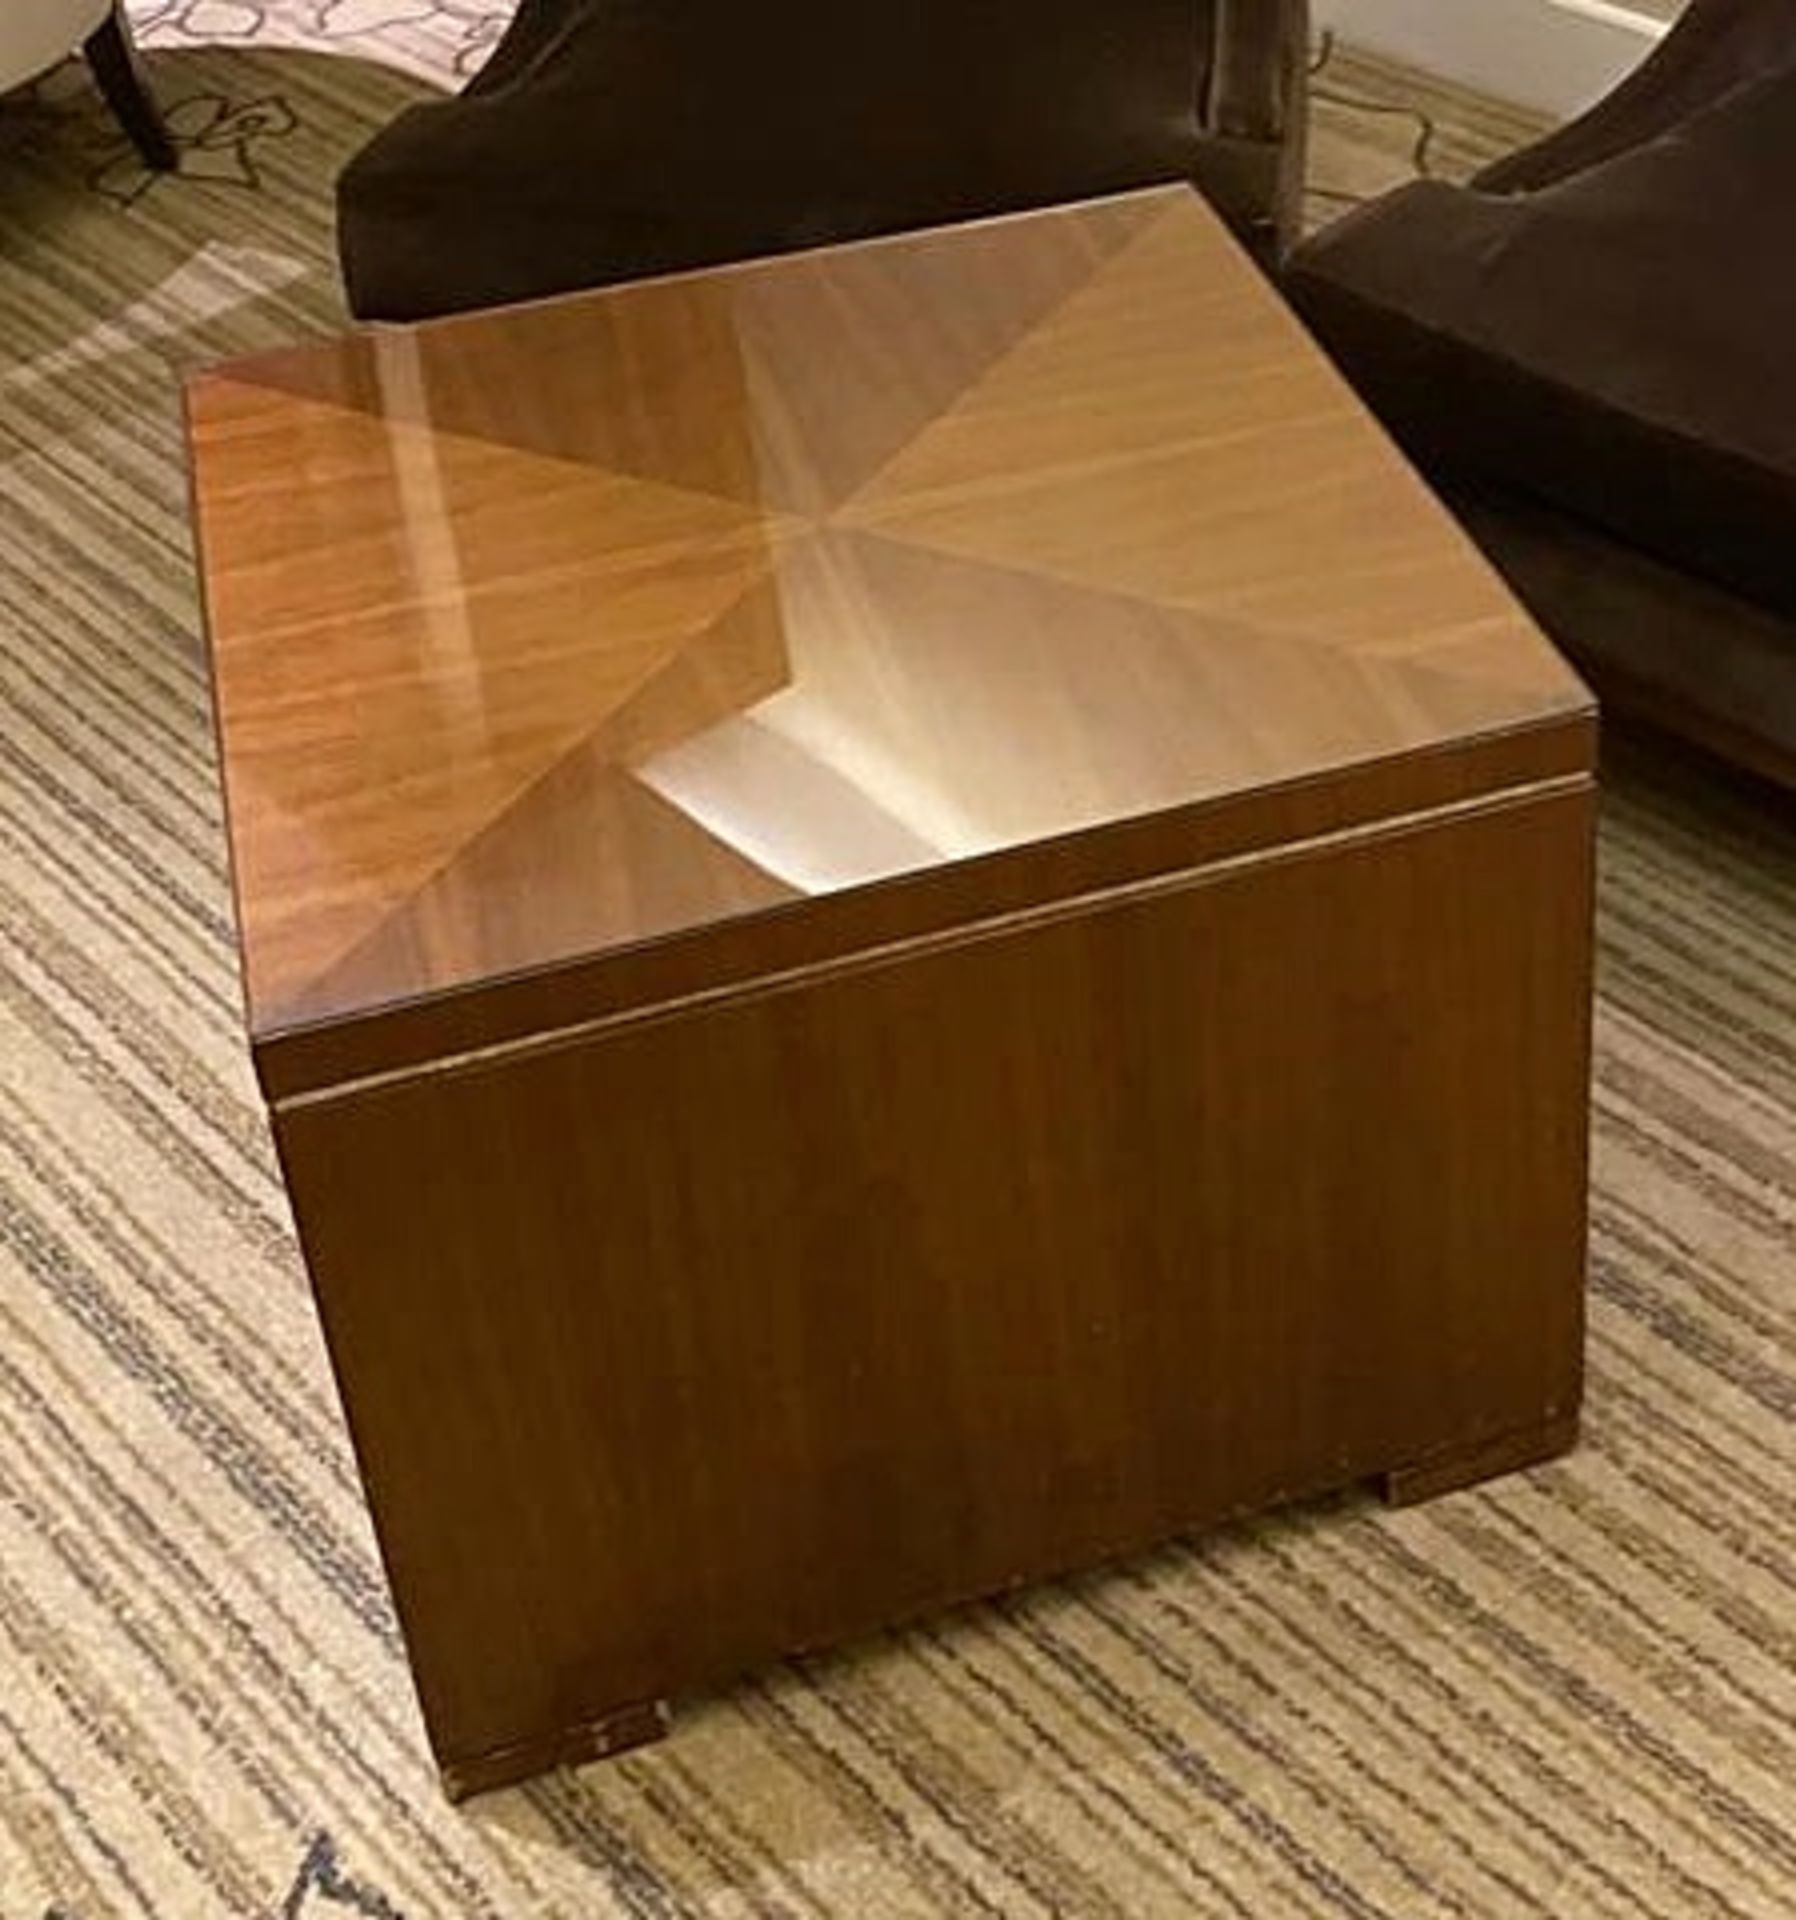 1 x Solid Wood Glass-topped Cube Coffee Table With Marquetry Detail On Top - Recently Procured - Image 3 of 3